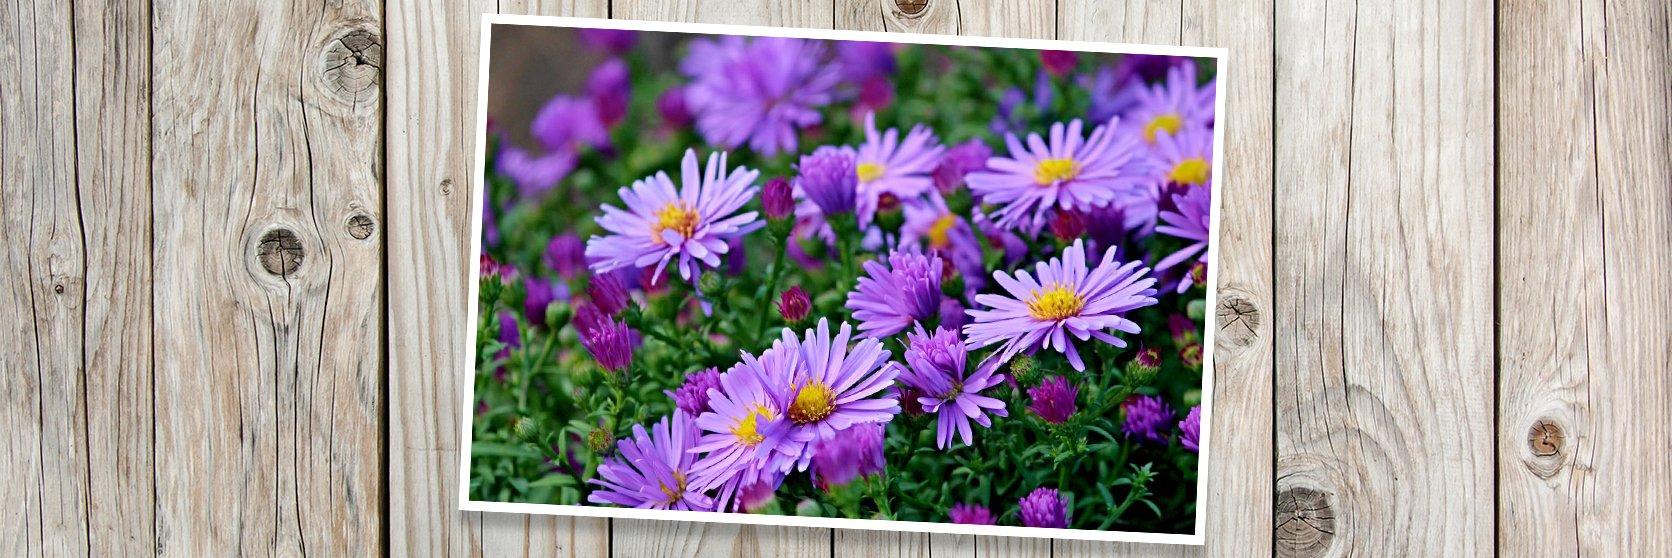 Asters-flowers-banner